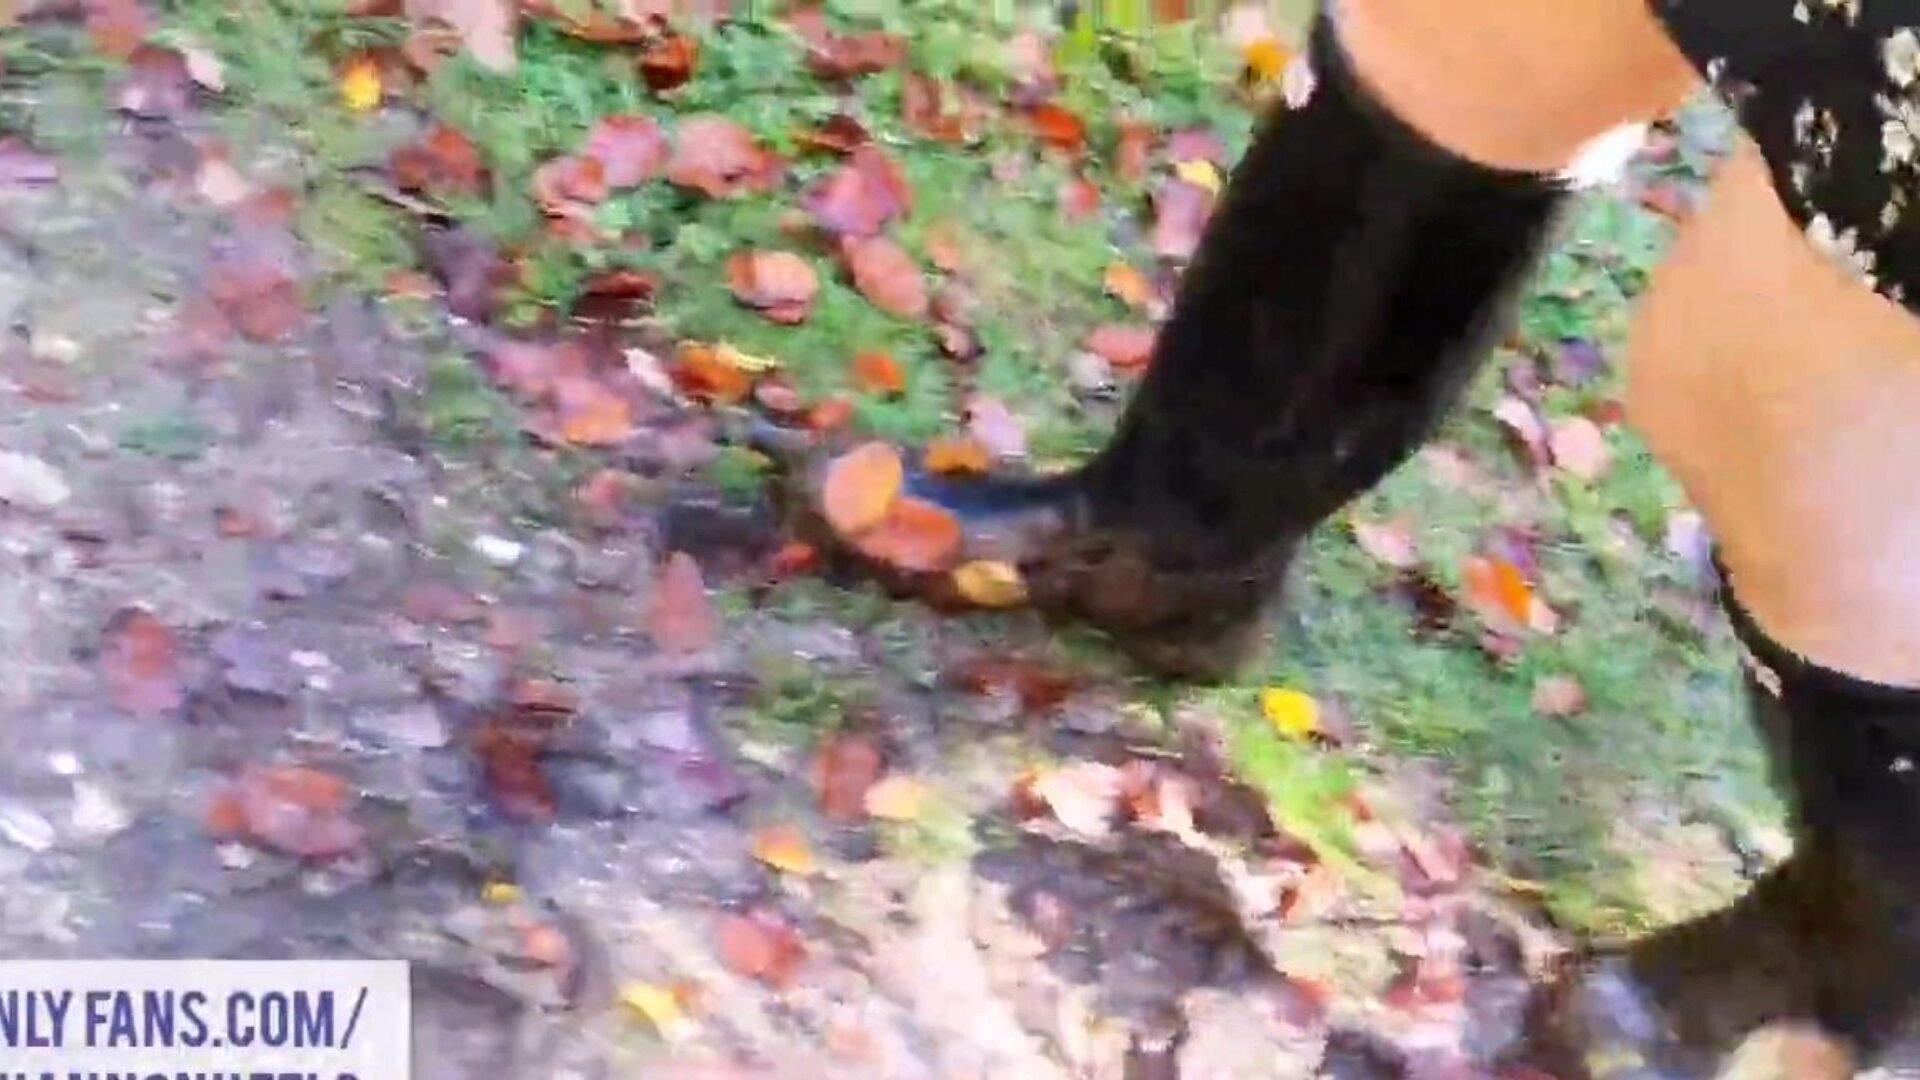 Flashing and Pissing in the Forest - Shannon Heels I enjoy taking walks in the woods and demonstrating off my forms and muff Gets me so wet pissing and fingerblasting myself, venturing anybody catching me. See me get my wellies all slimy and bawdy gonzo